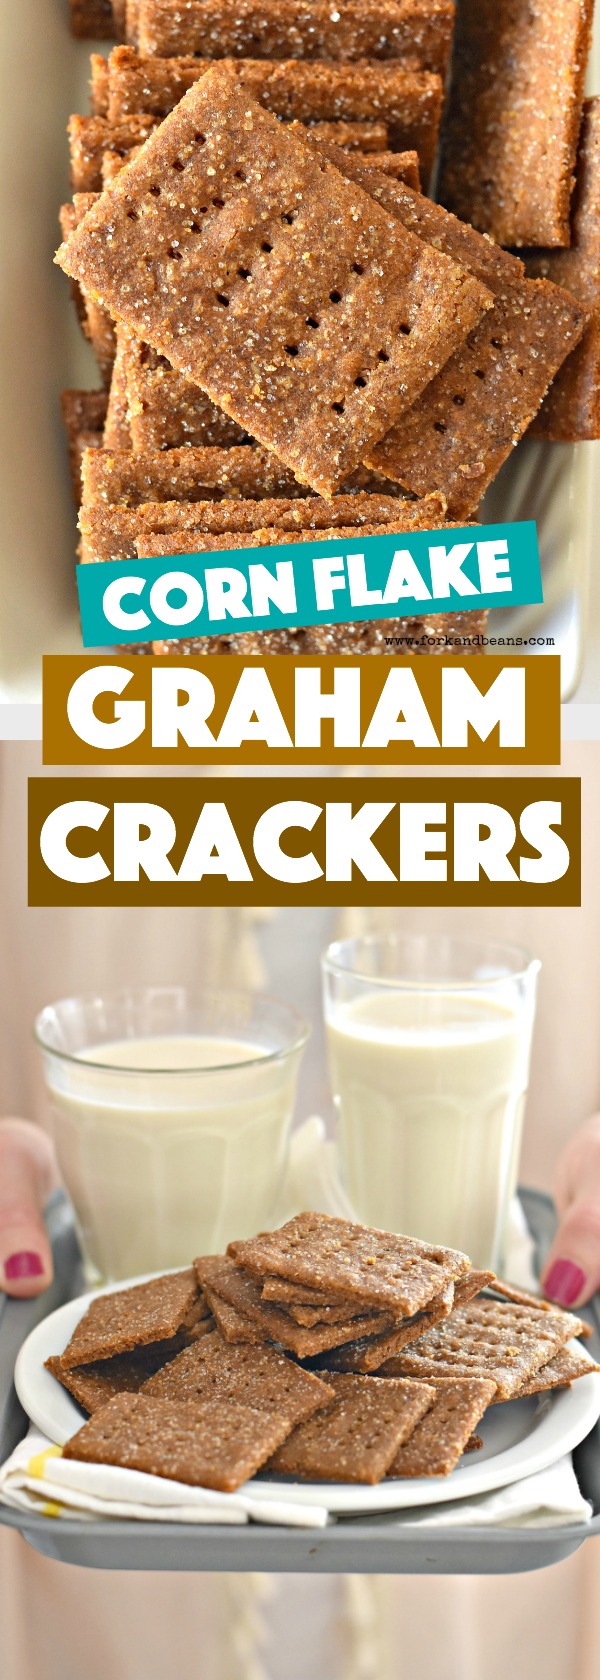 Light, crisp, crunchy, and semi-sweet, these Corn Flake Graham Crackers are the perfect treat for dunking into an ice-cold glass of nondairy milk!